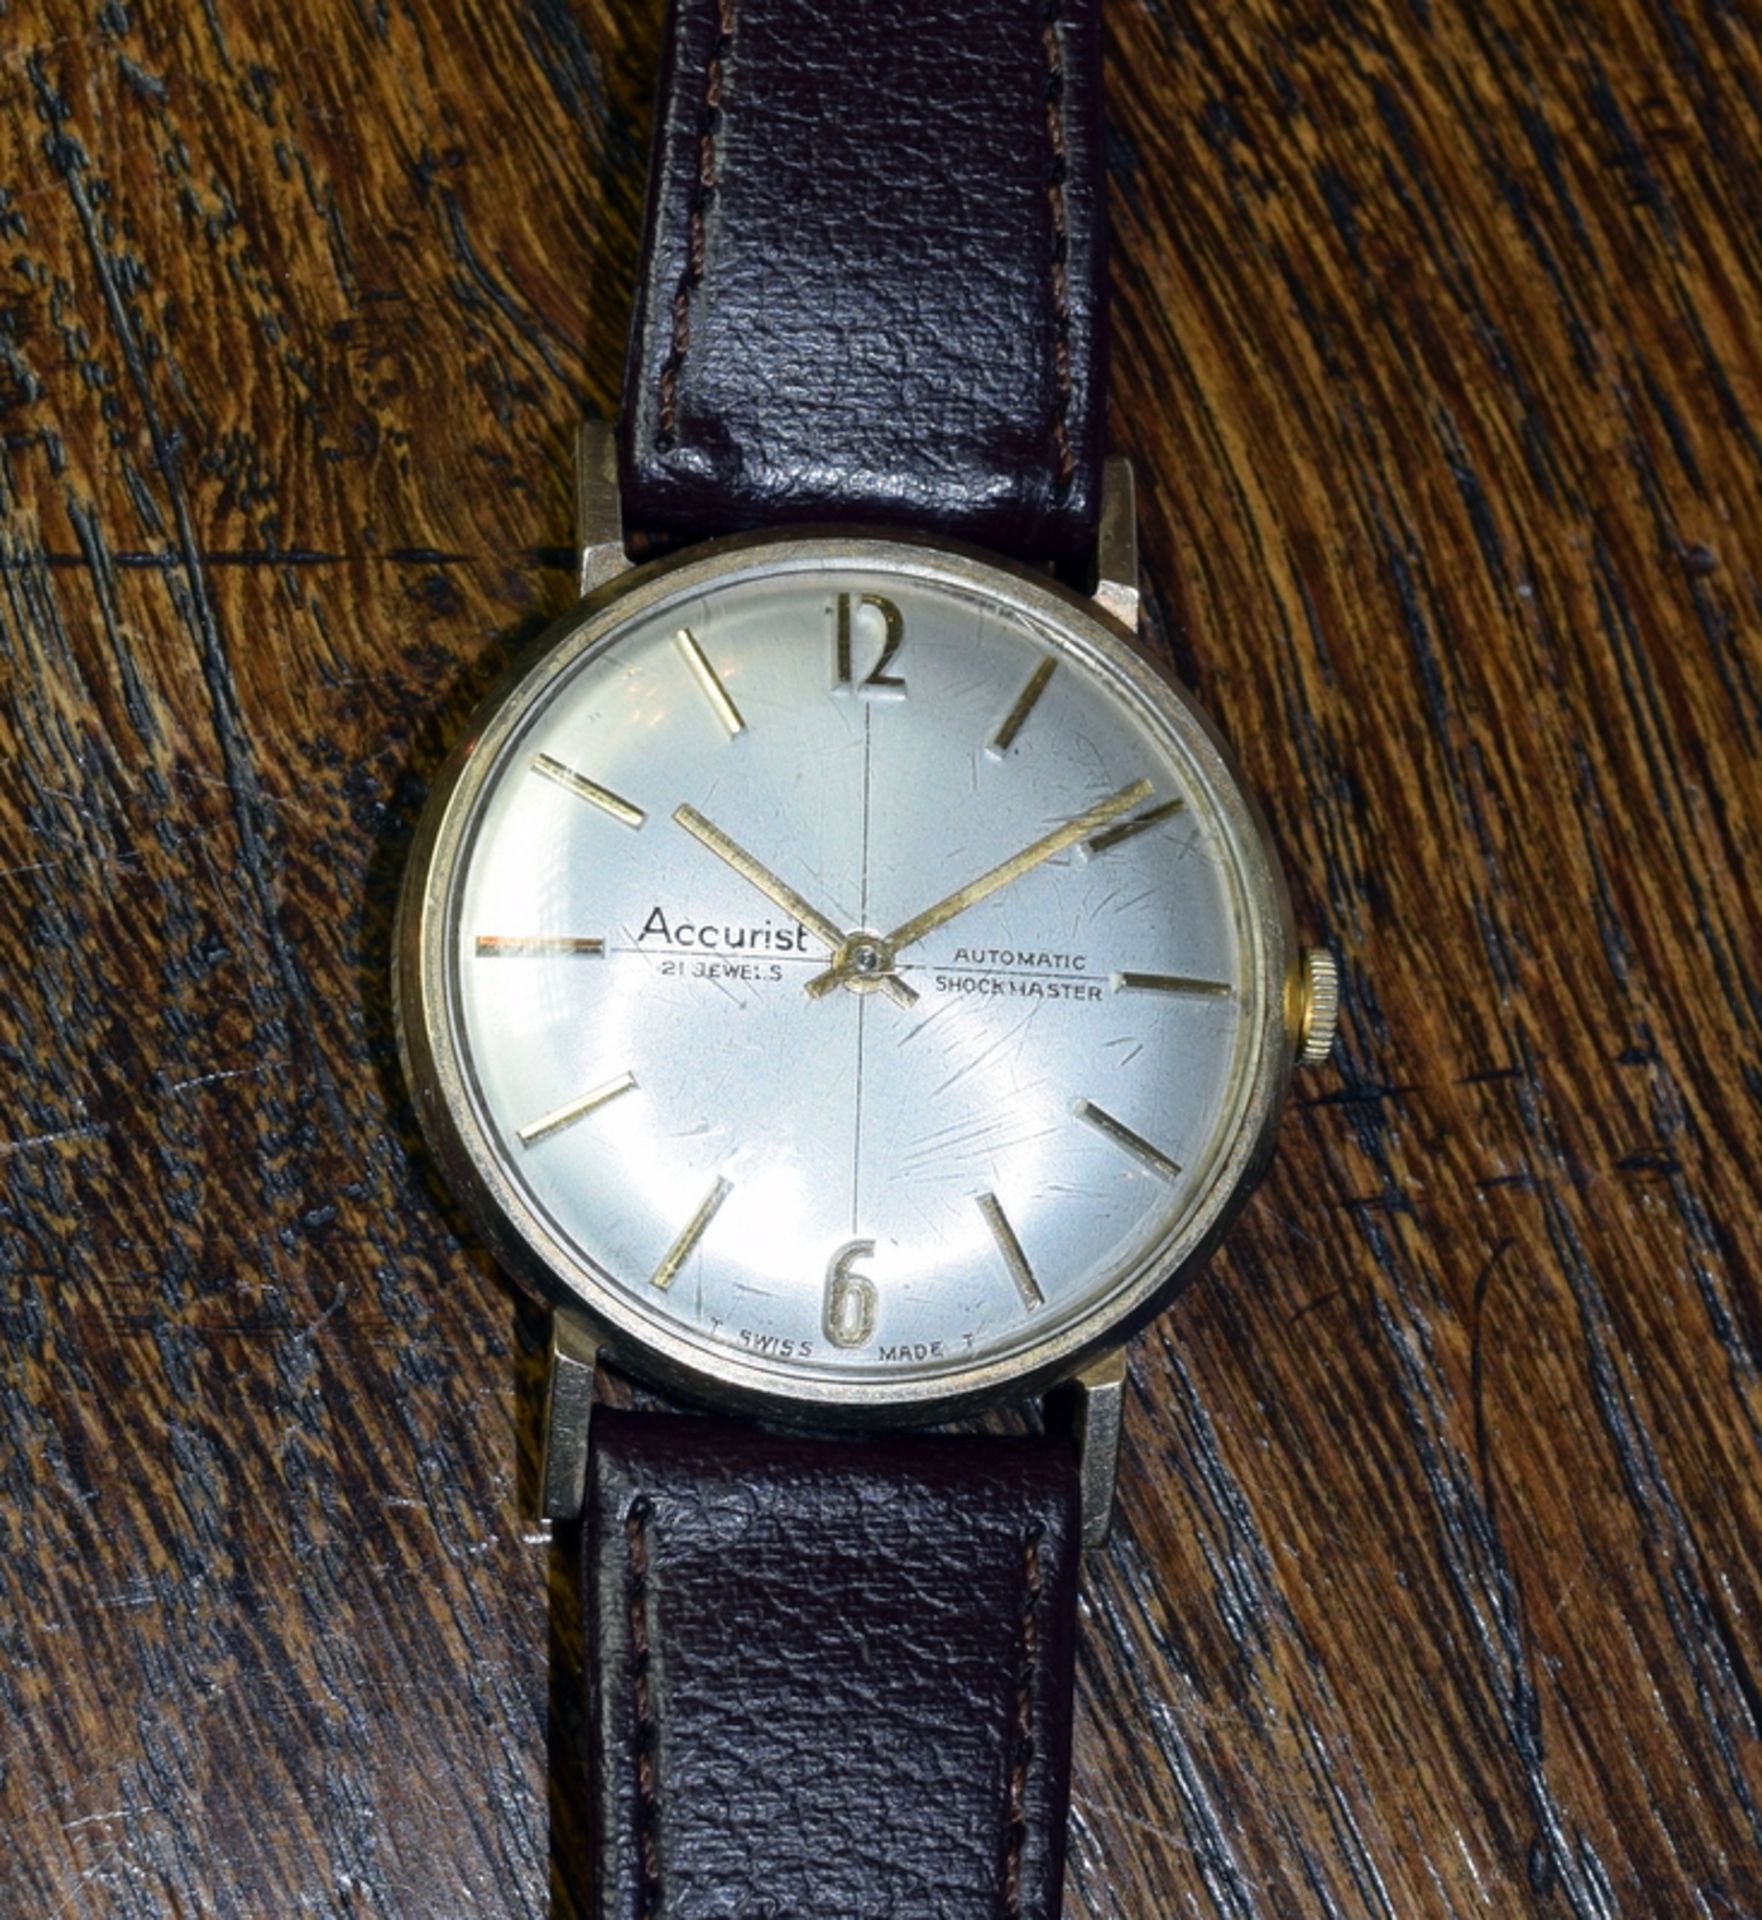 9ct Gold Gentleman's Accurist Automatic Watch - Image 3 of 5